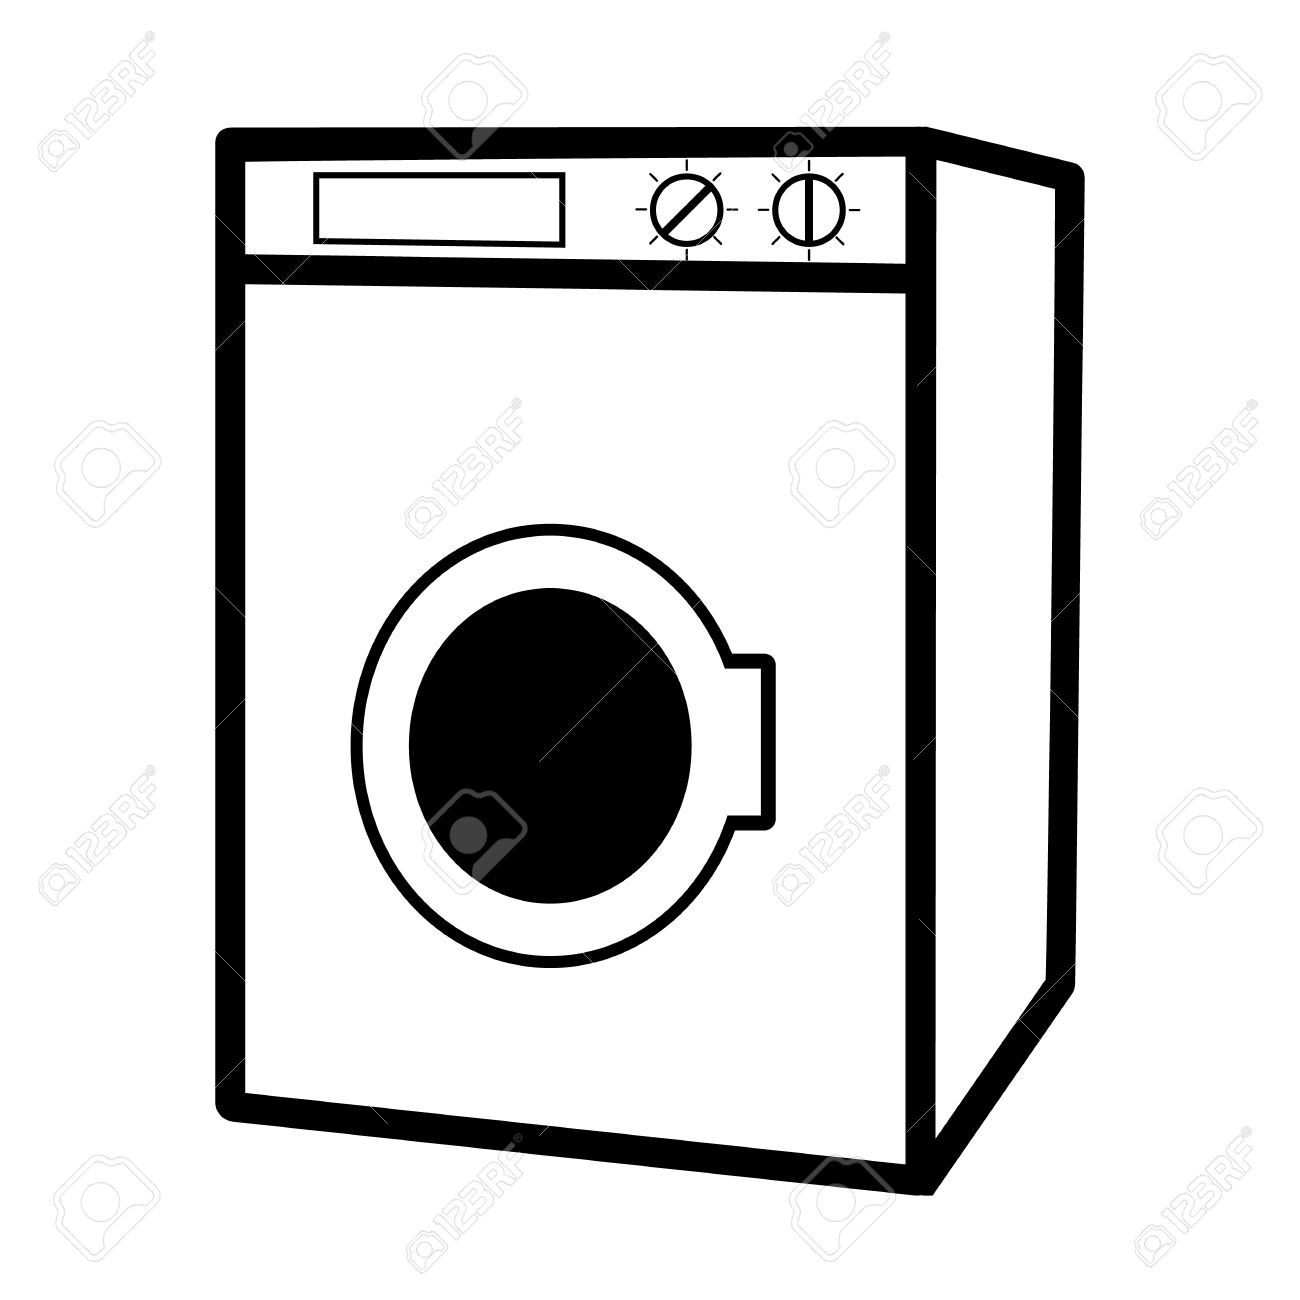 clothes washer clipart - photo #33